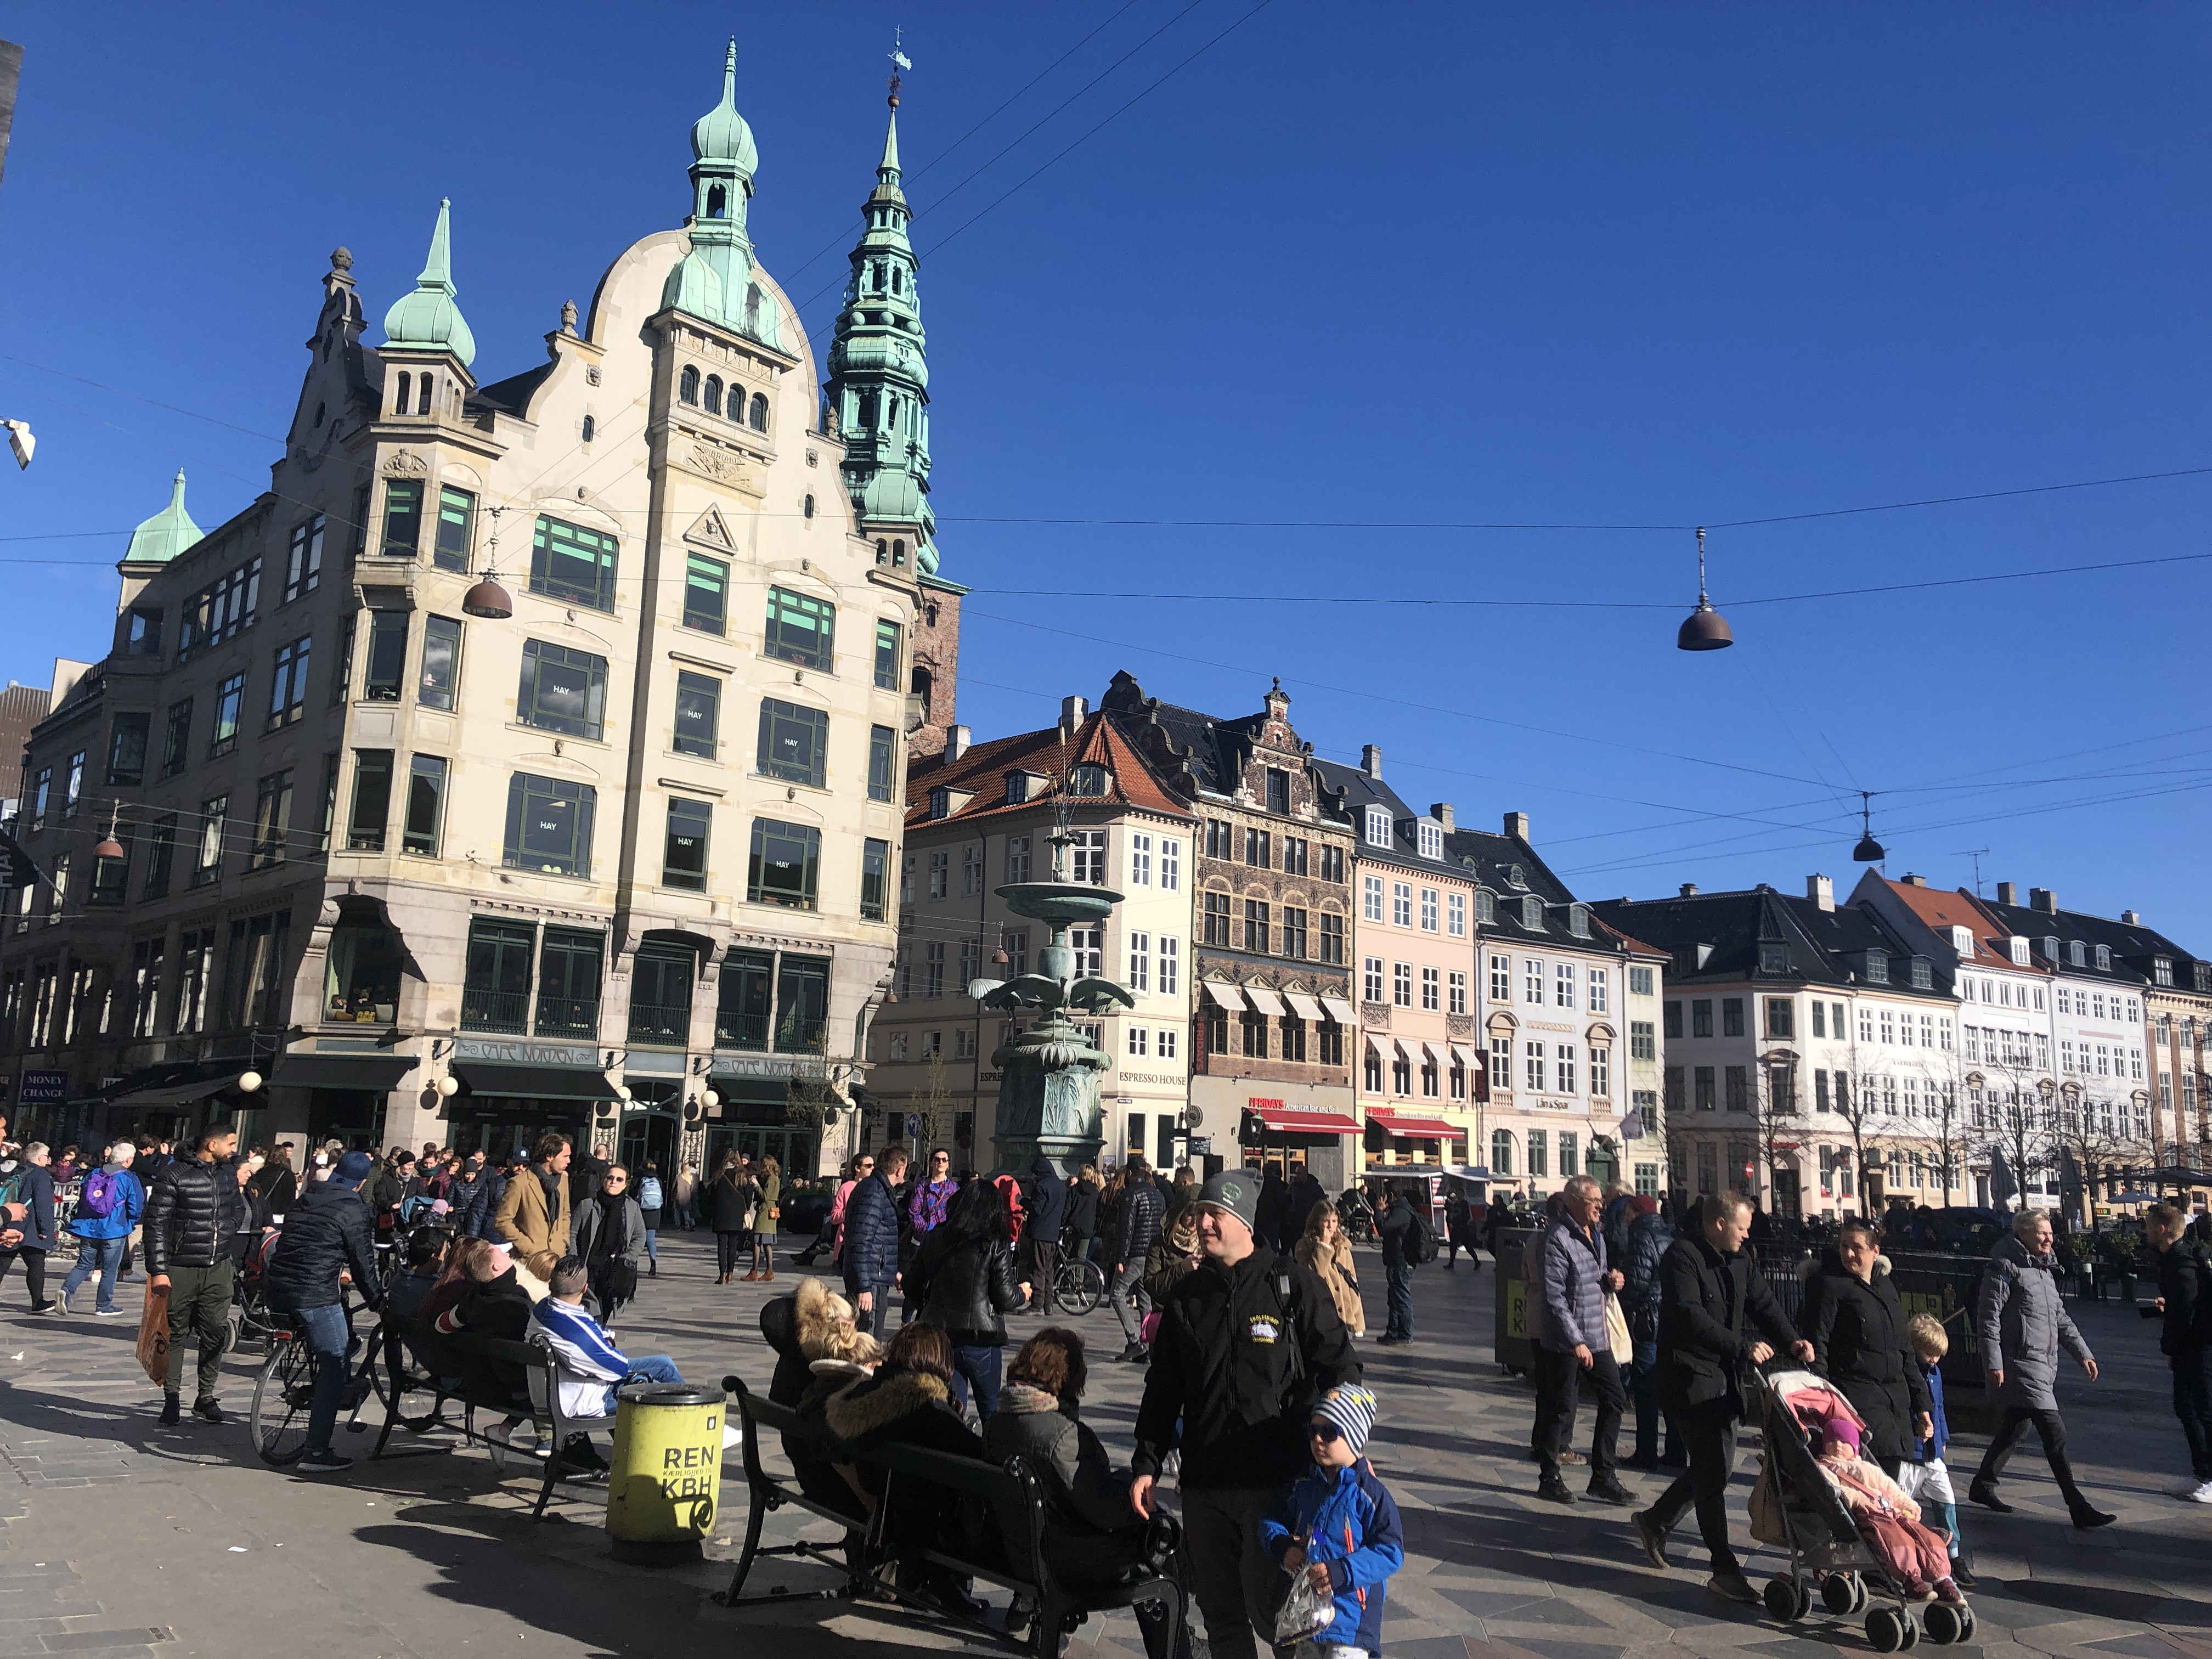 Attendees could enjoy central Copenhagen after the sessions.